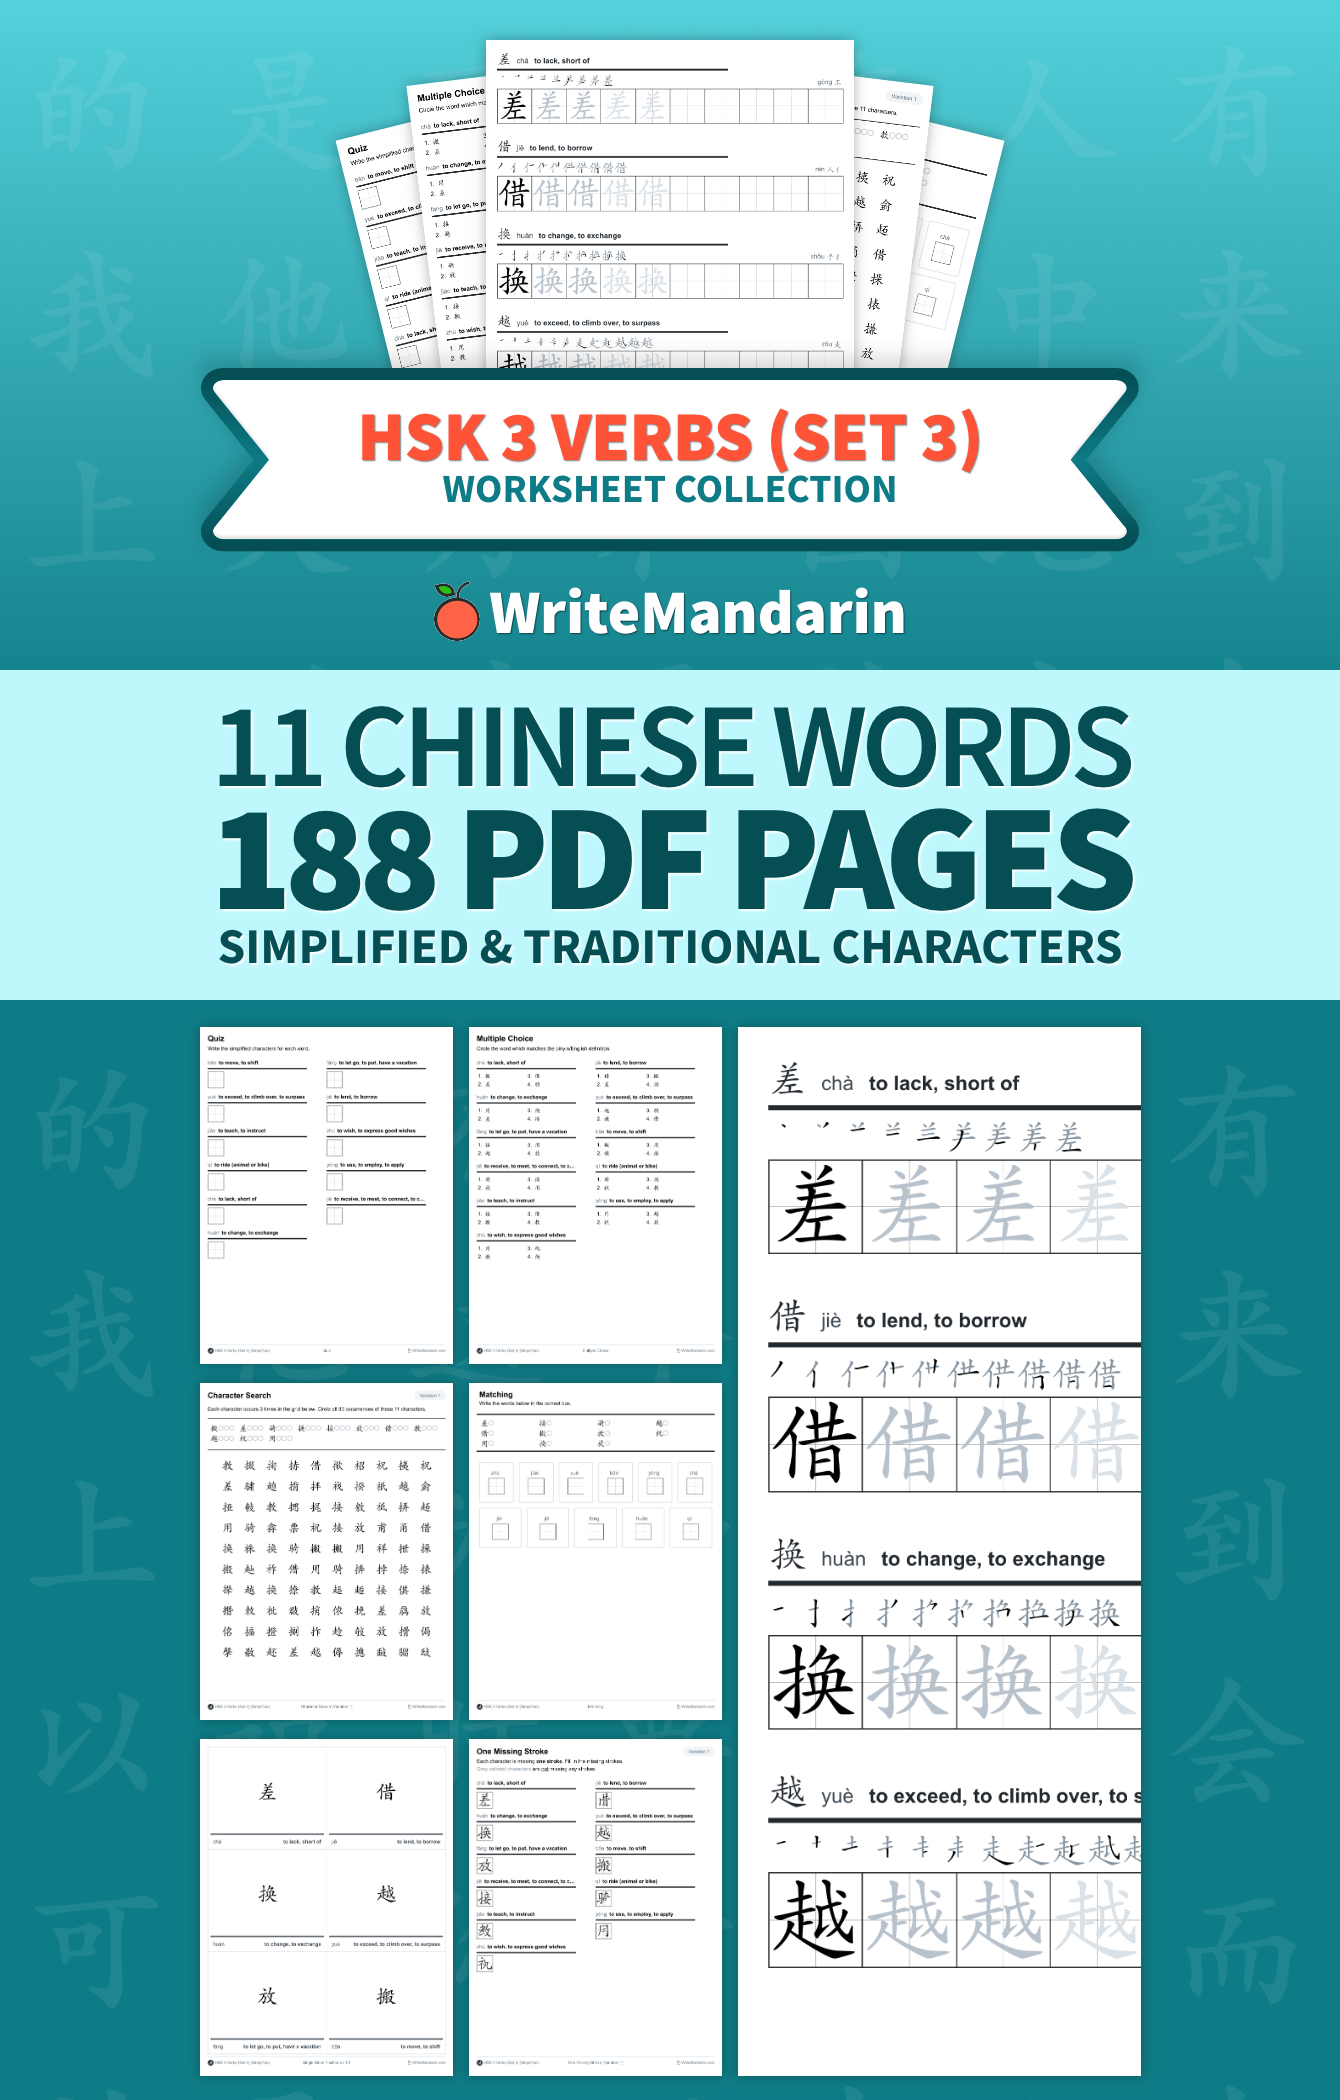 Preview image of HSK 3 Verbs (Set 3) worksheet collection